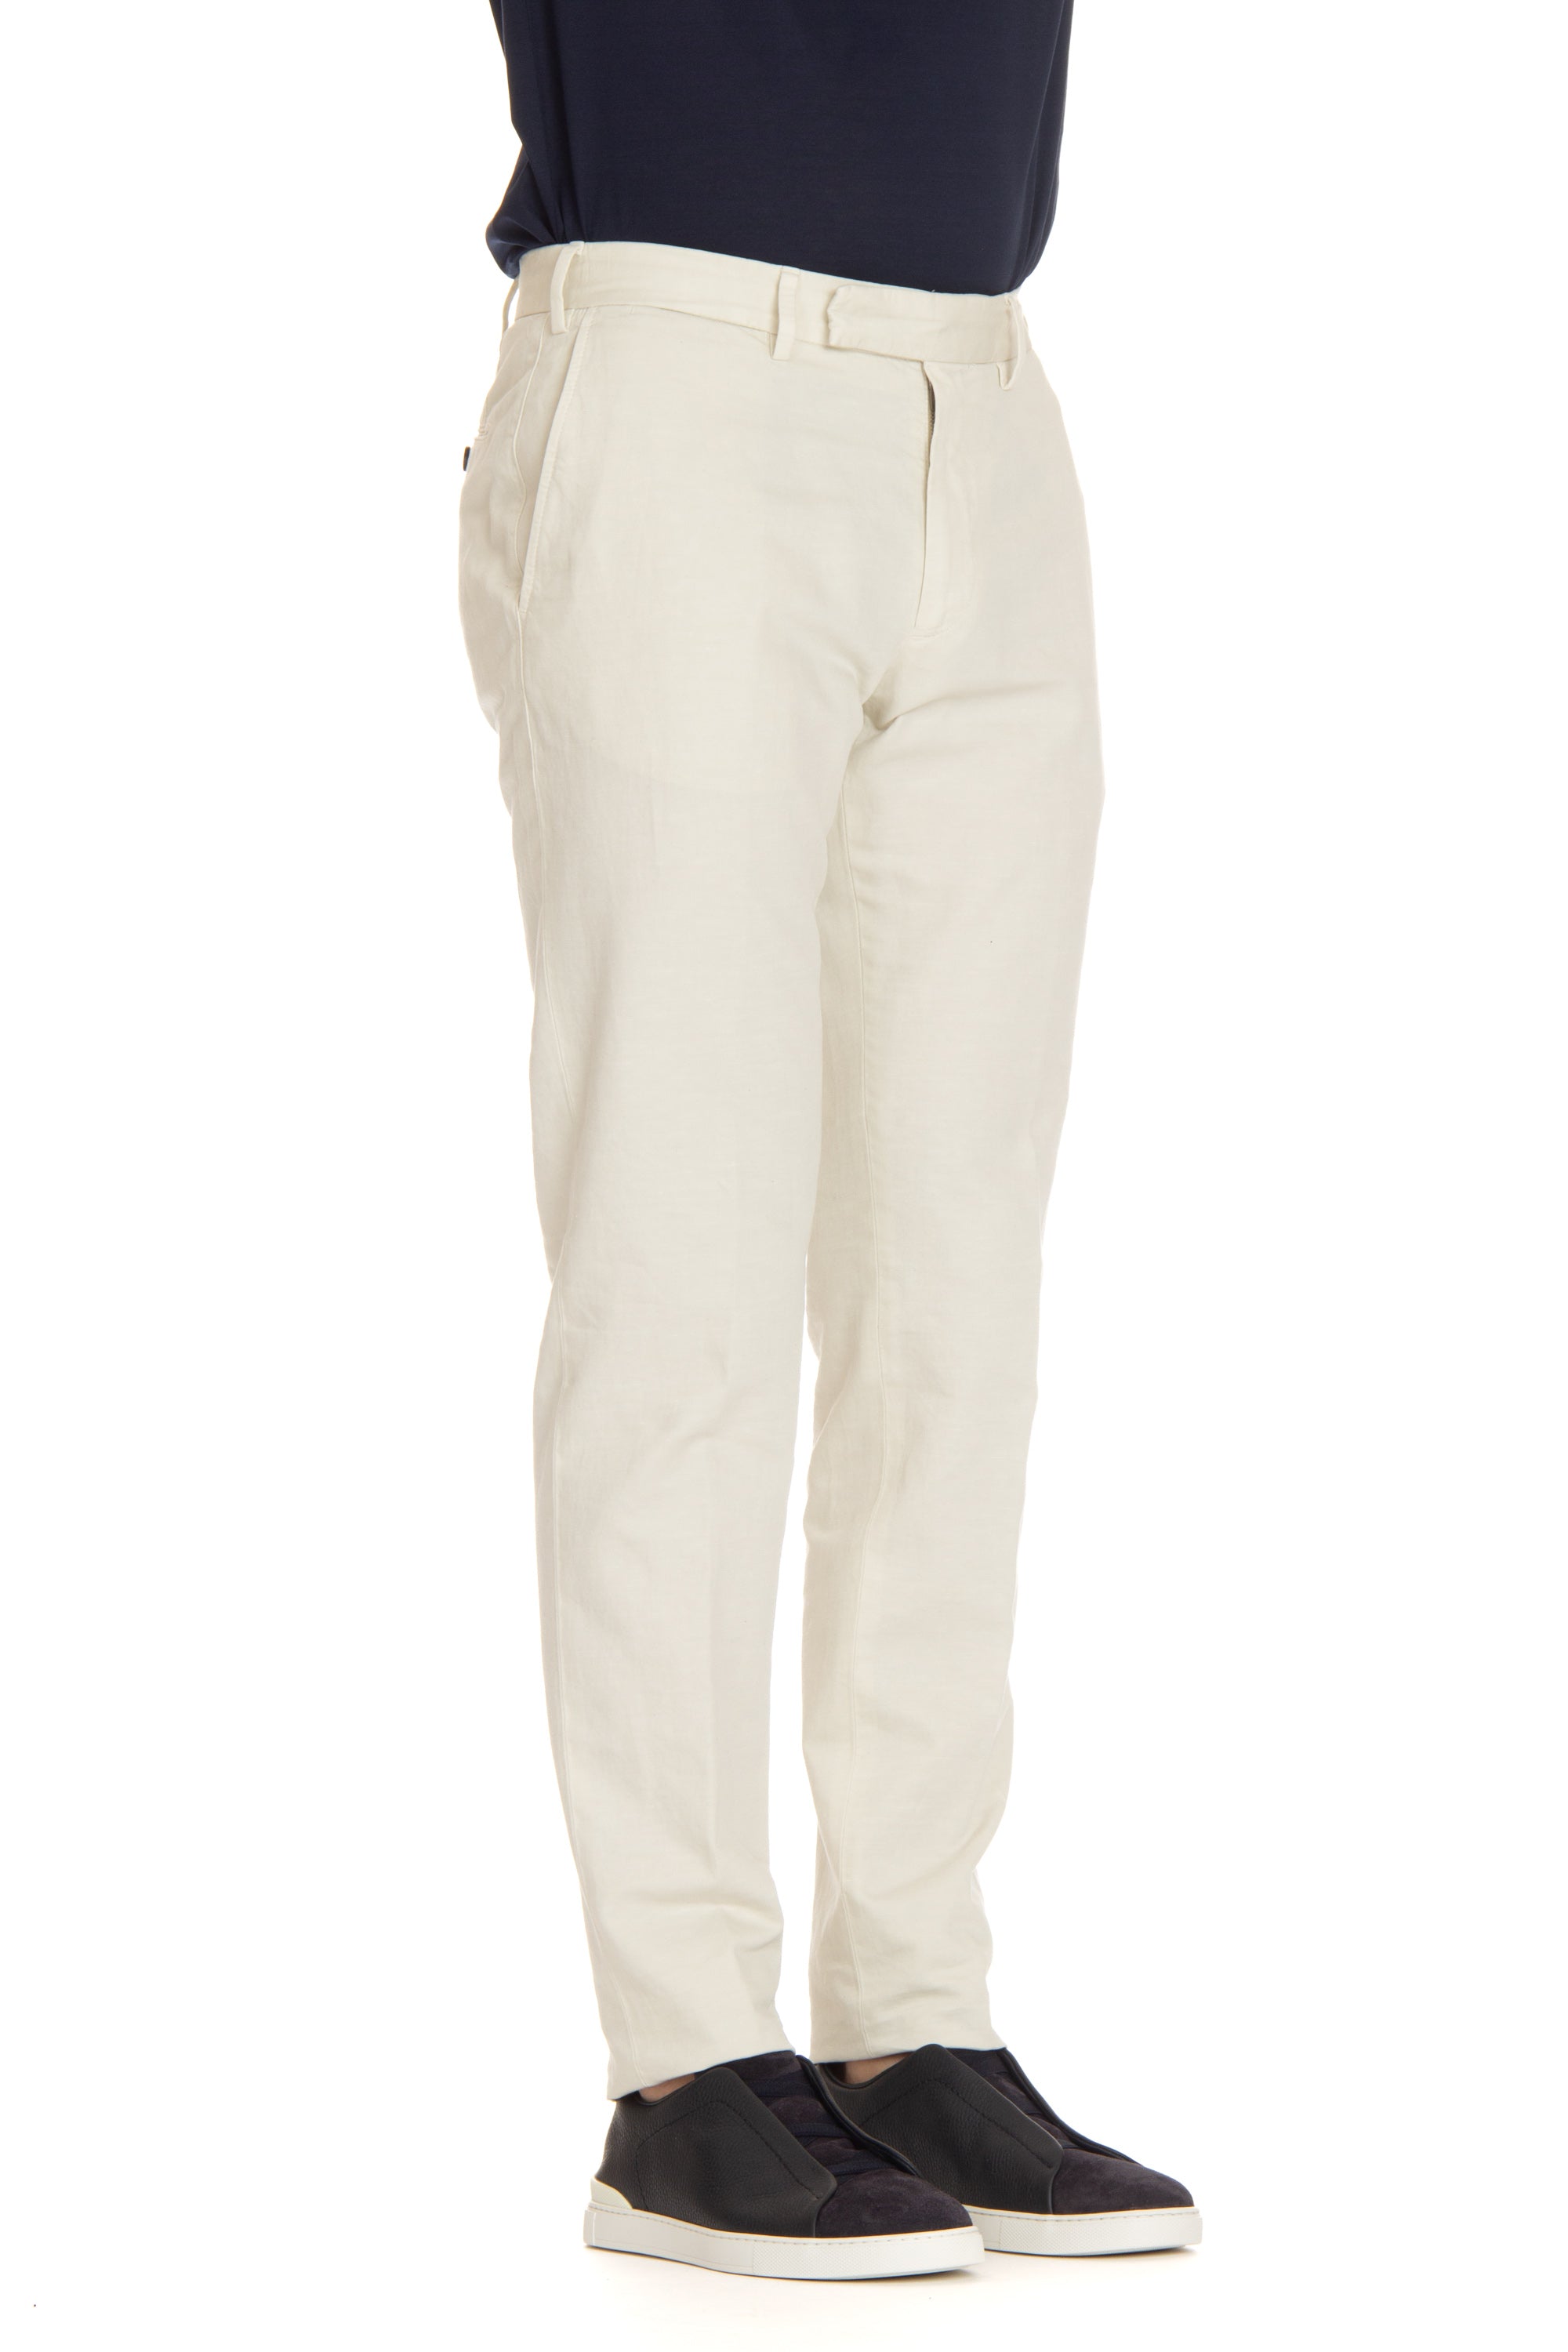 Summer chino trousers in cotton-linen